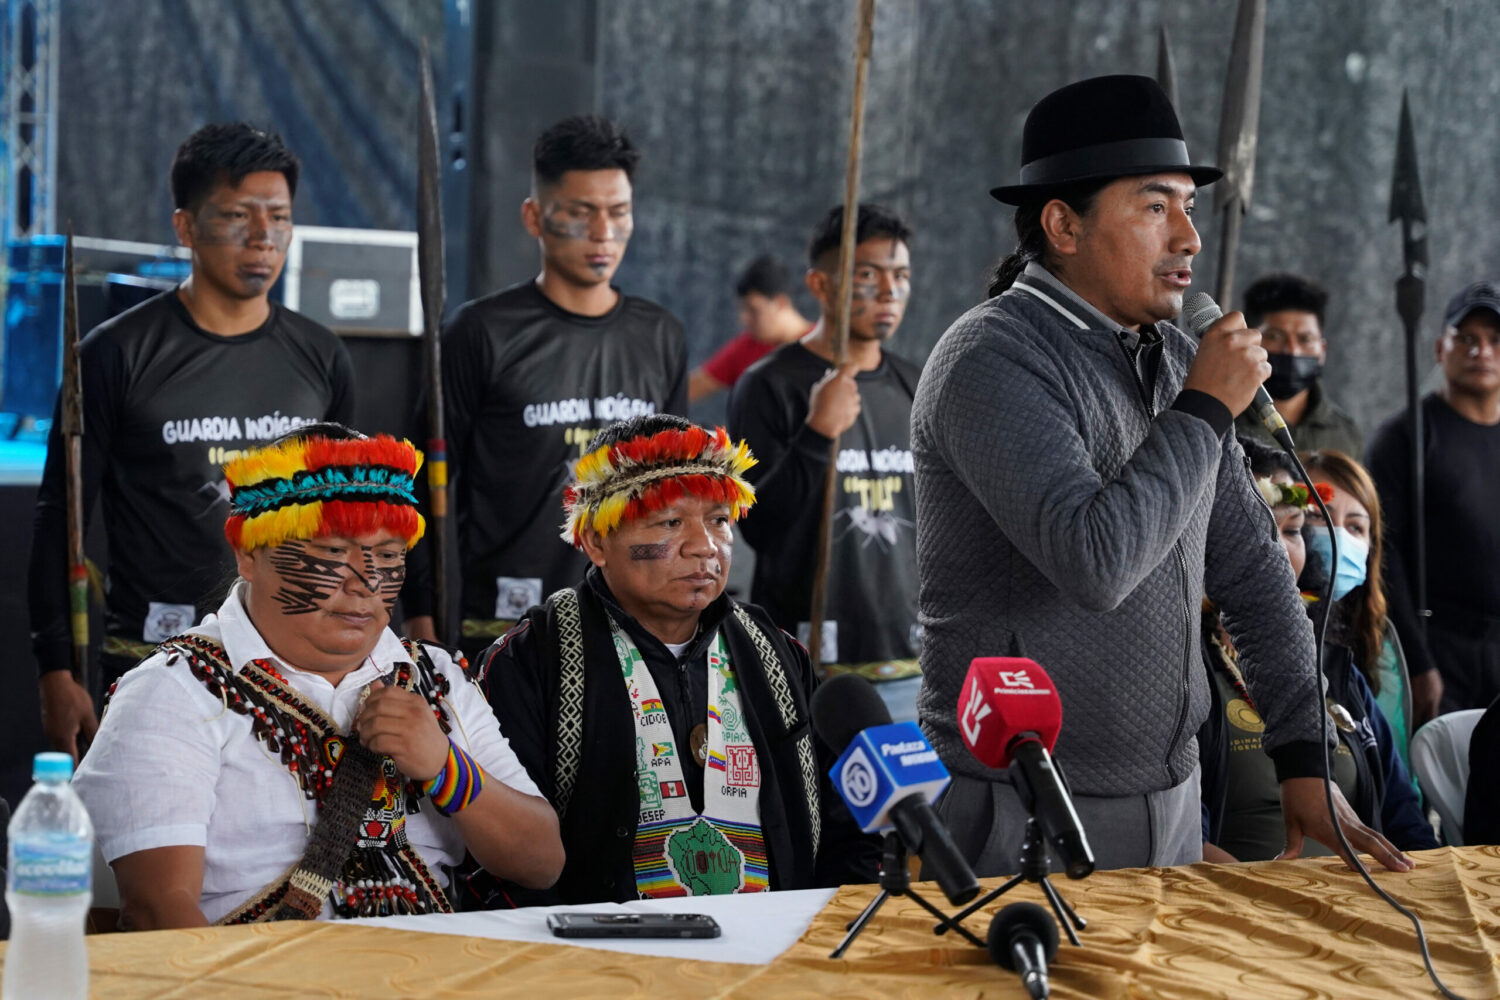 Leaders from indigenous communities in the Amazon basin hold a news conference during a meeting where they demanded South American governments halt extractive industries that damage the rainforest, in Union Base, Ecuador March 15, 2022. (REUTERS/Johanna Alarcon)